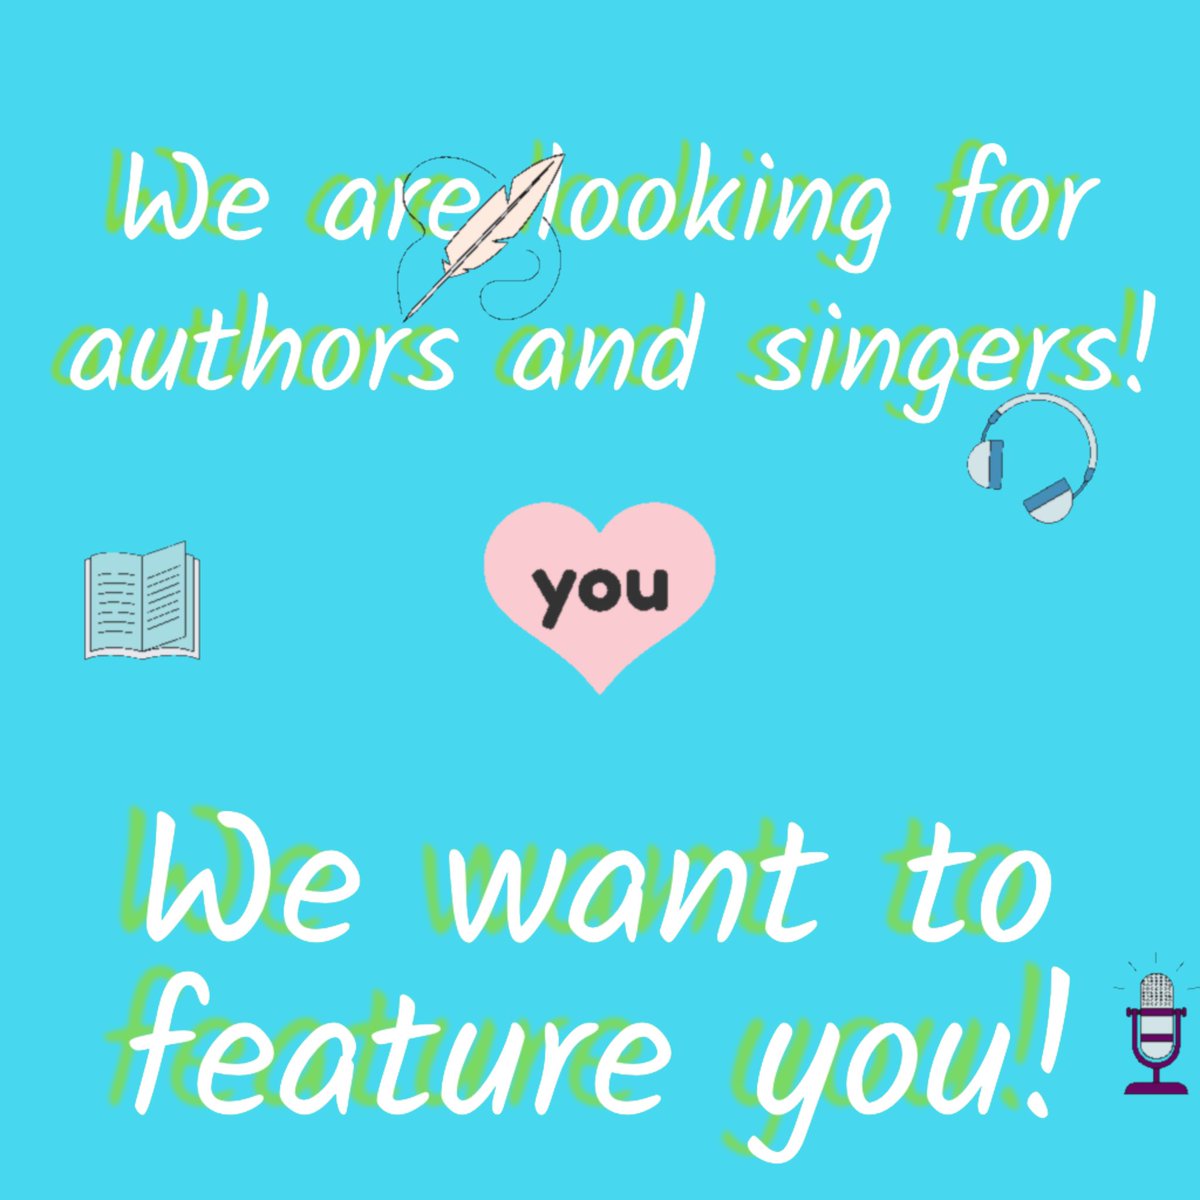 We are looking for Christian singers and authors to feature (for free) on our site. Interested? Send a DM! #Christians #authors #singers #christianauthor #christiansinger #JesusIsKing